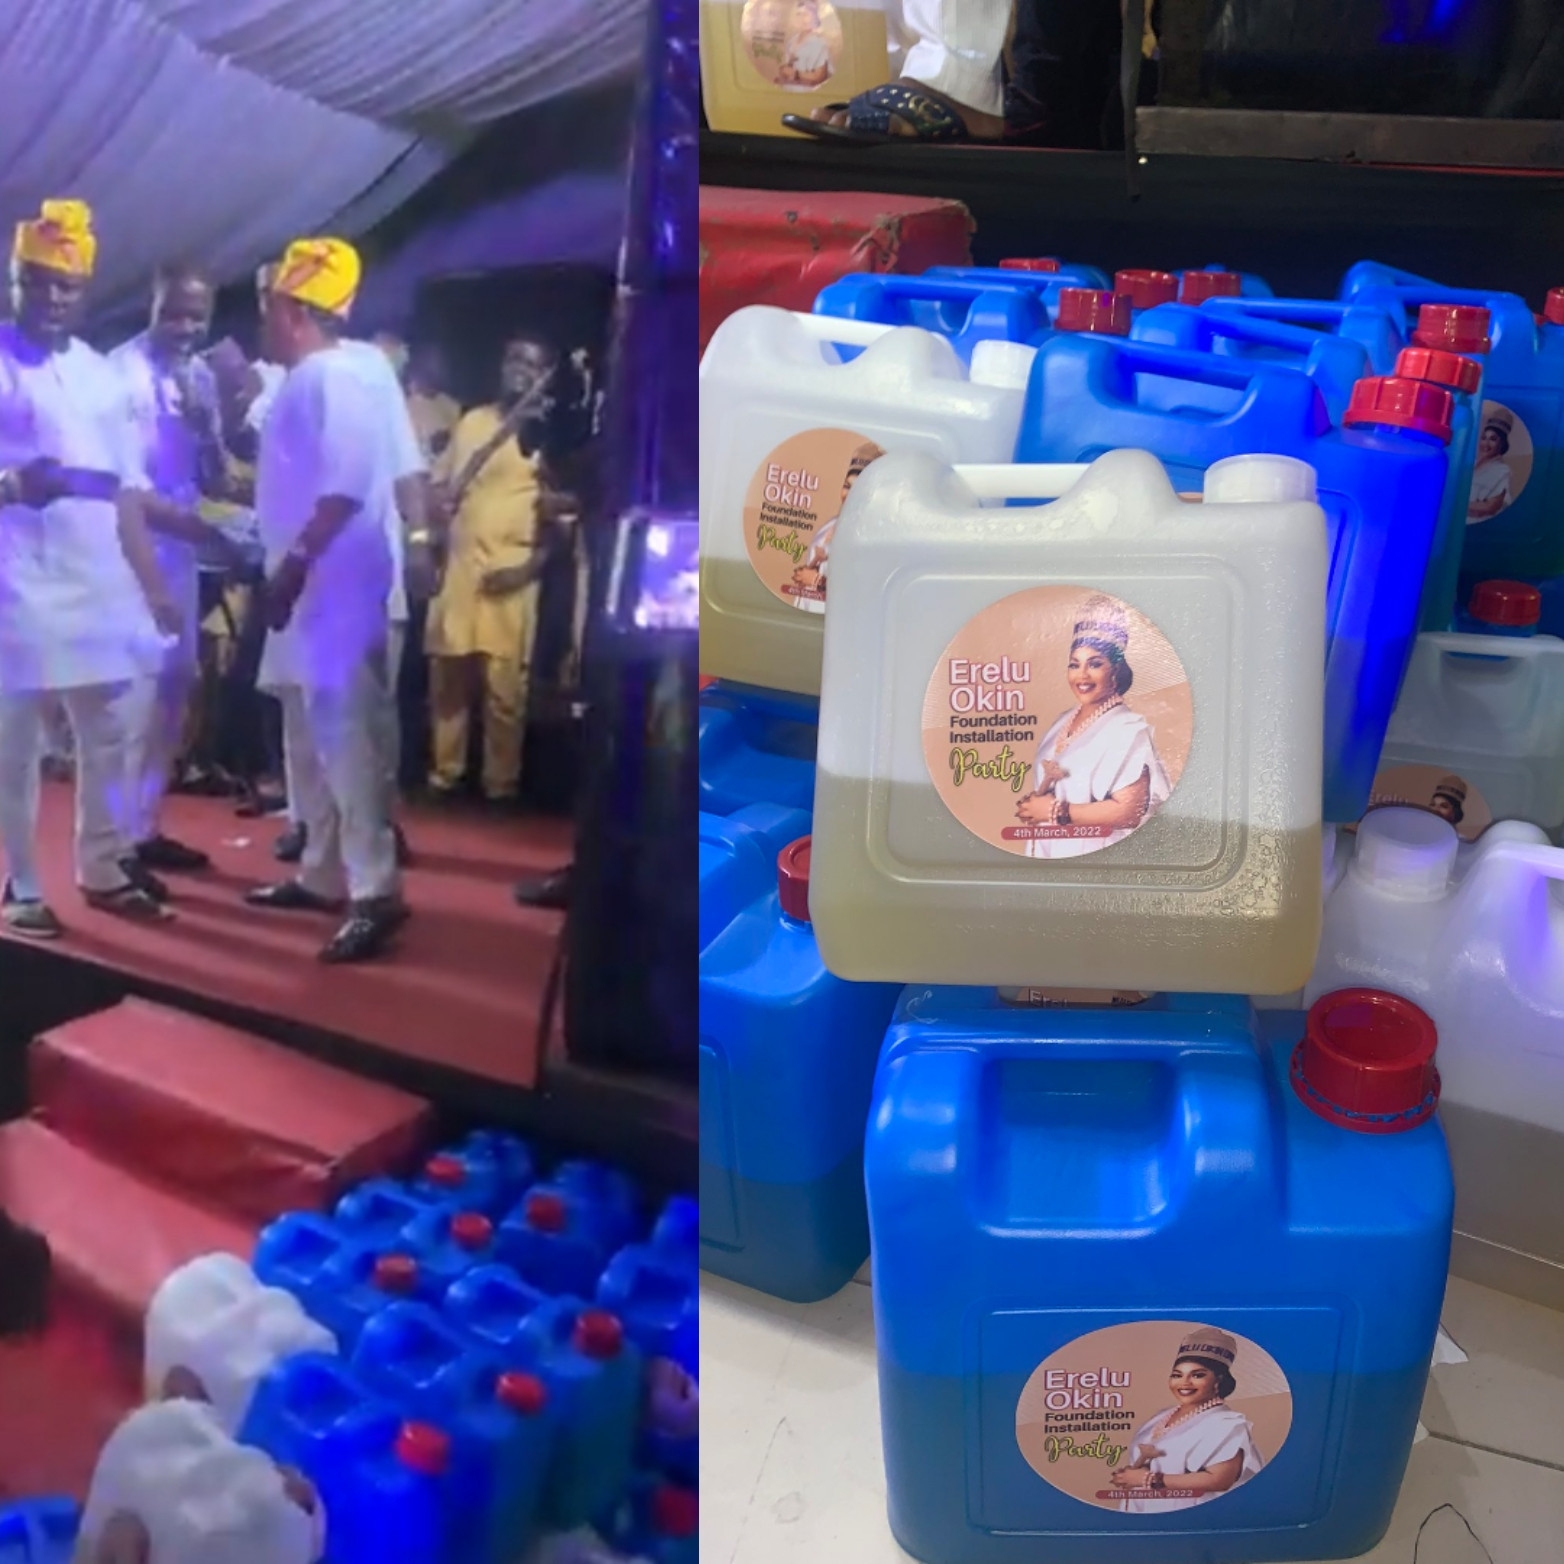 IT IS DANGEROUS”-LAGOS STATE GOVT KICKS AS PETROL IS GIVEN AS SOUVENIR AT A PARTY, VOWS TO MAKE ALL INVOLVED IN IT ACCOUNT FOR THEIR ACTION